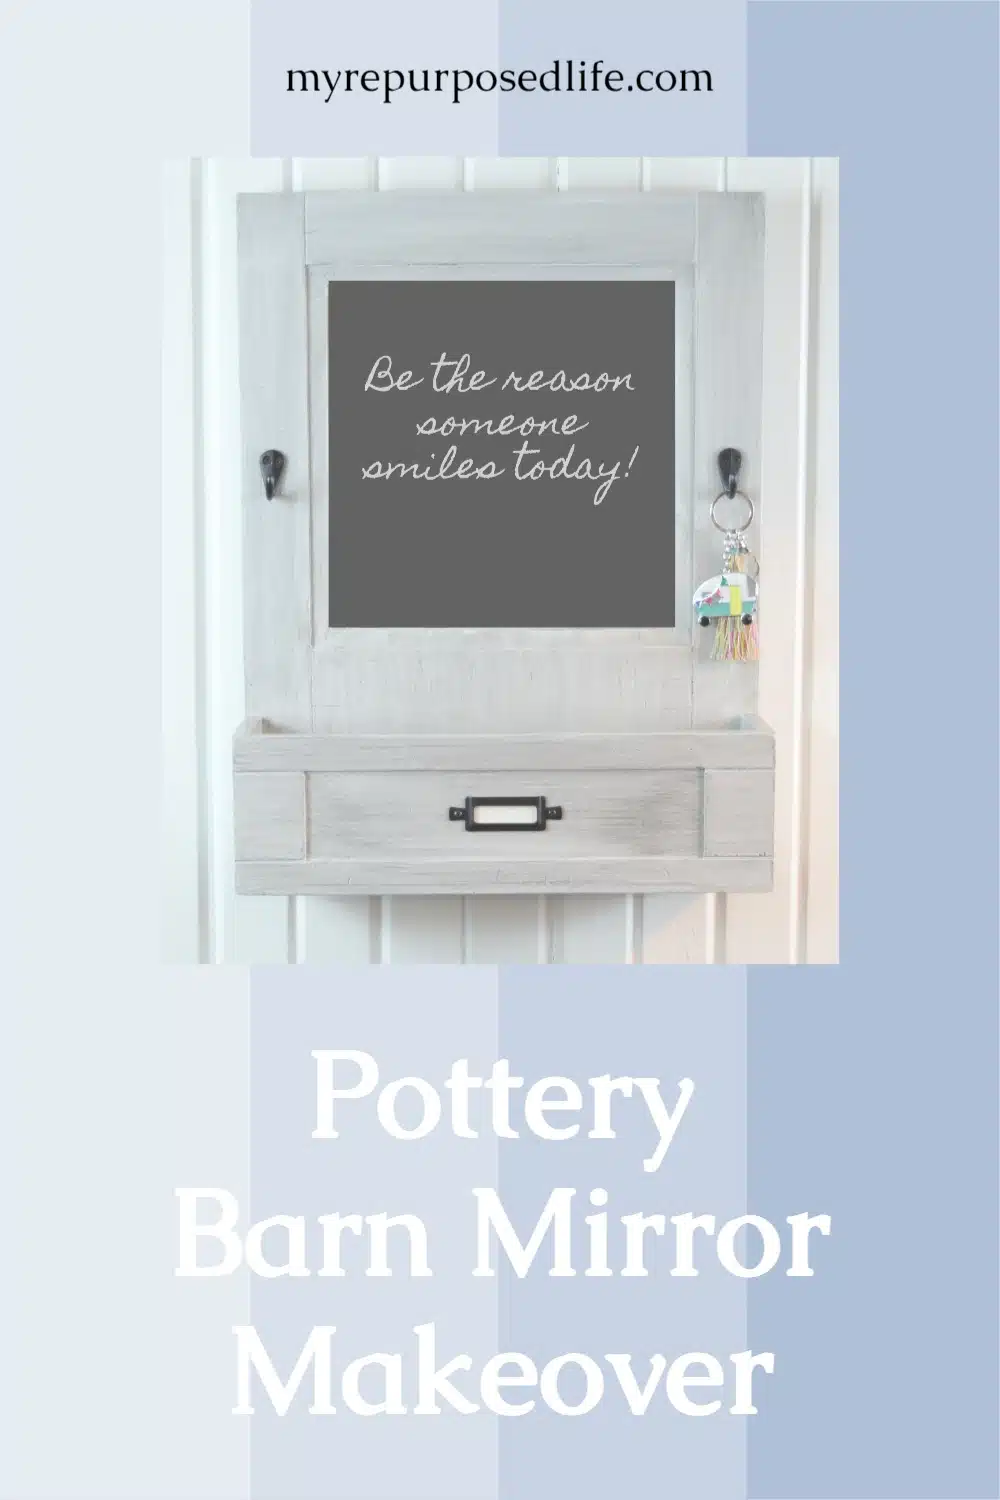 A rustic pottery barn mirror gets a new makeover. This easy thrift store project will have you wondering what project you should update. #myrepurposedlife #upcycle #potterybarn #mirror #makeover via @repurposedlife